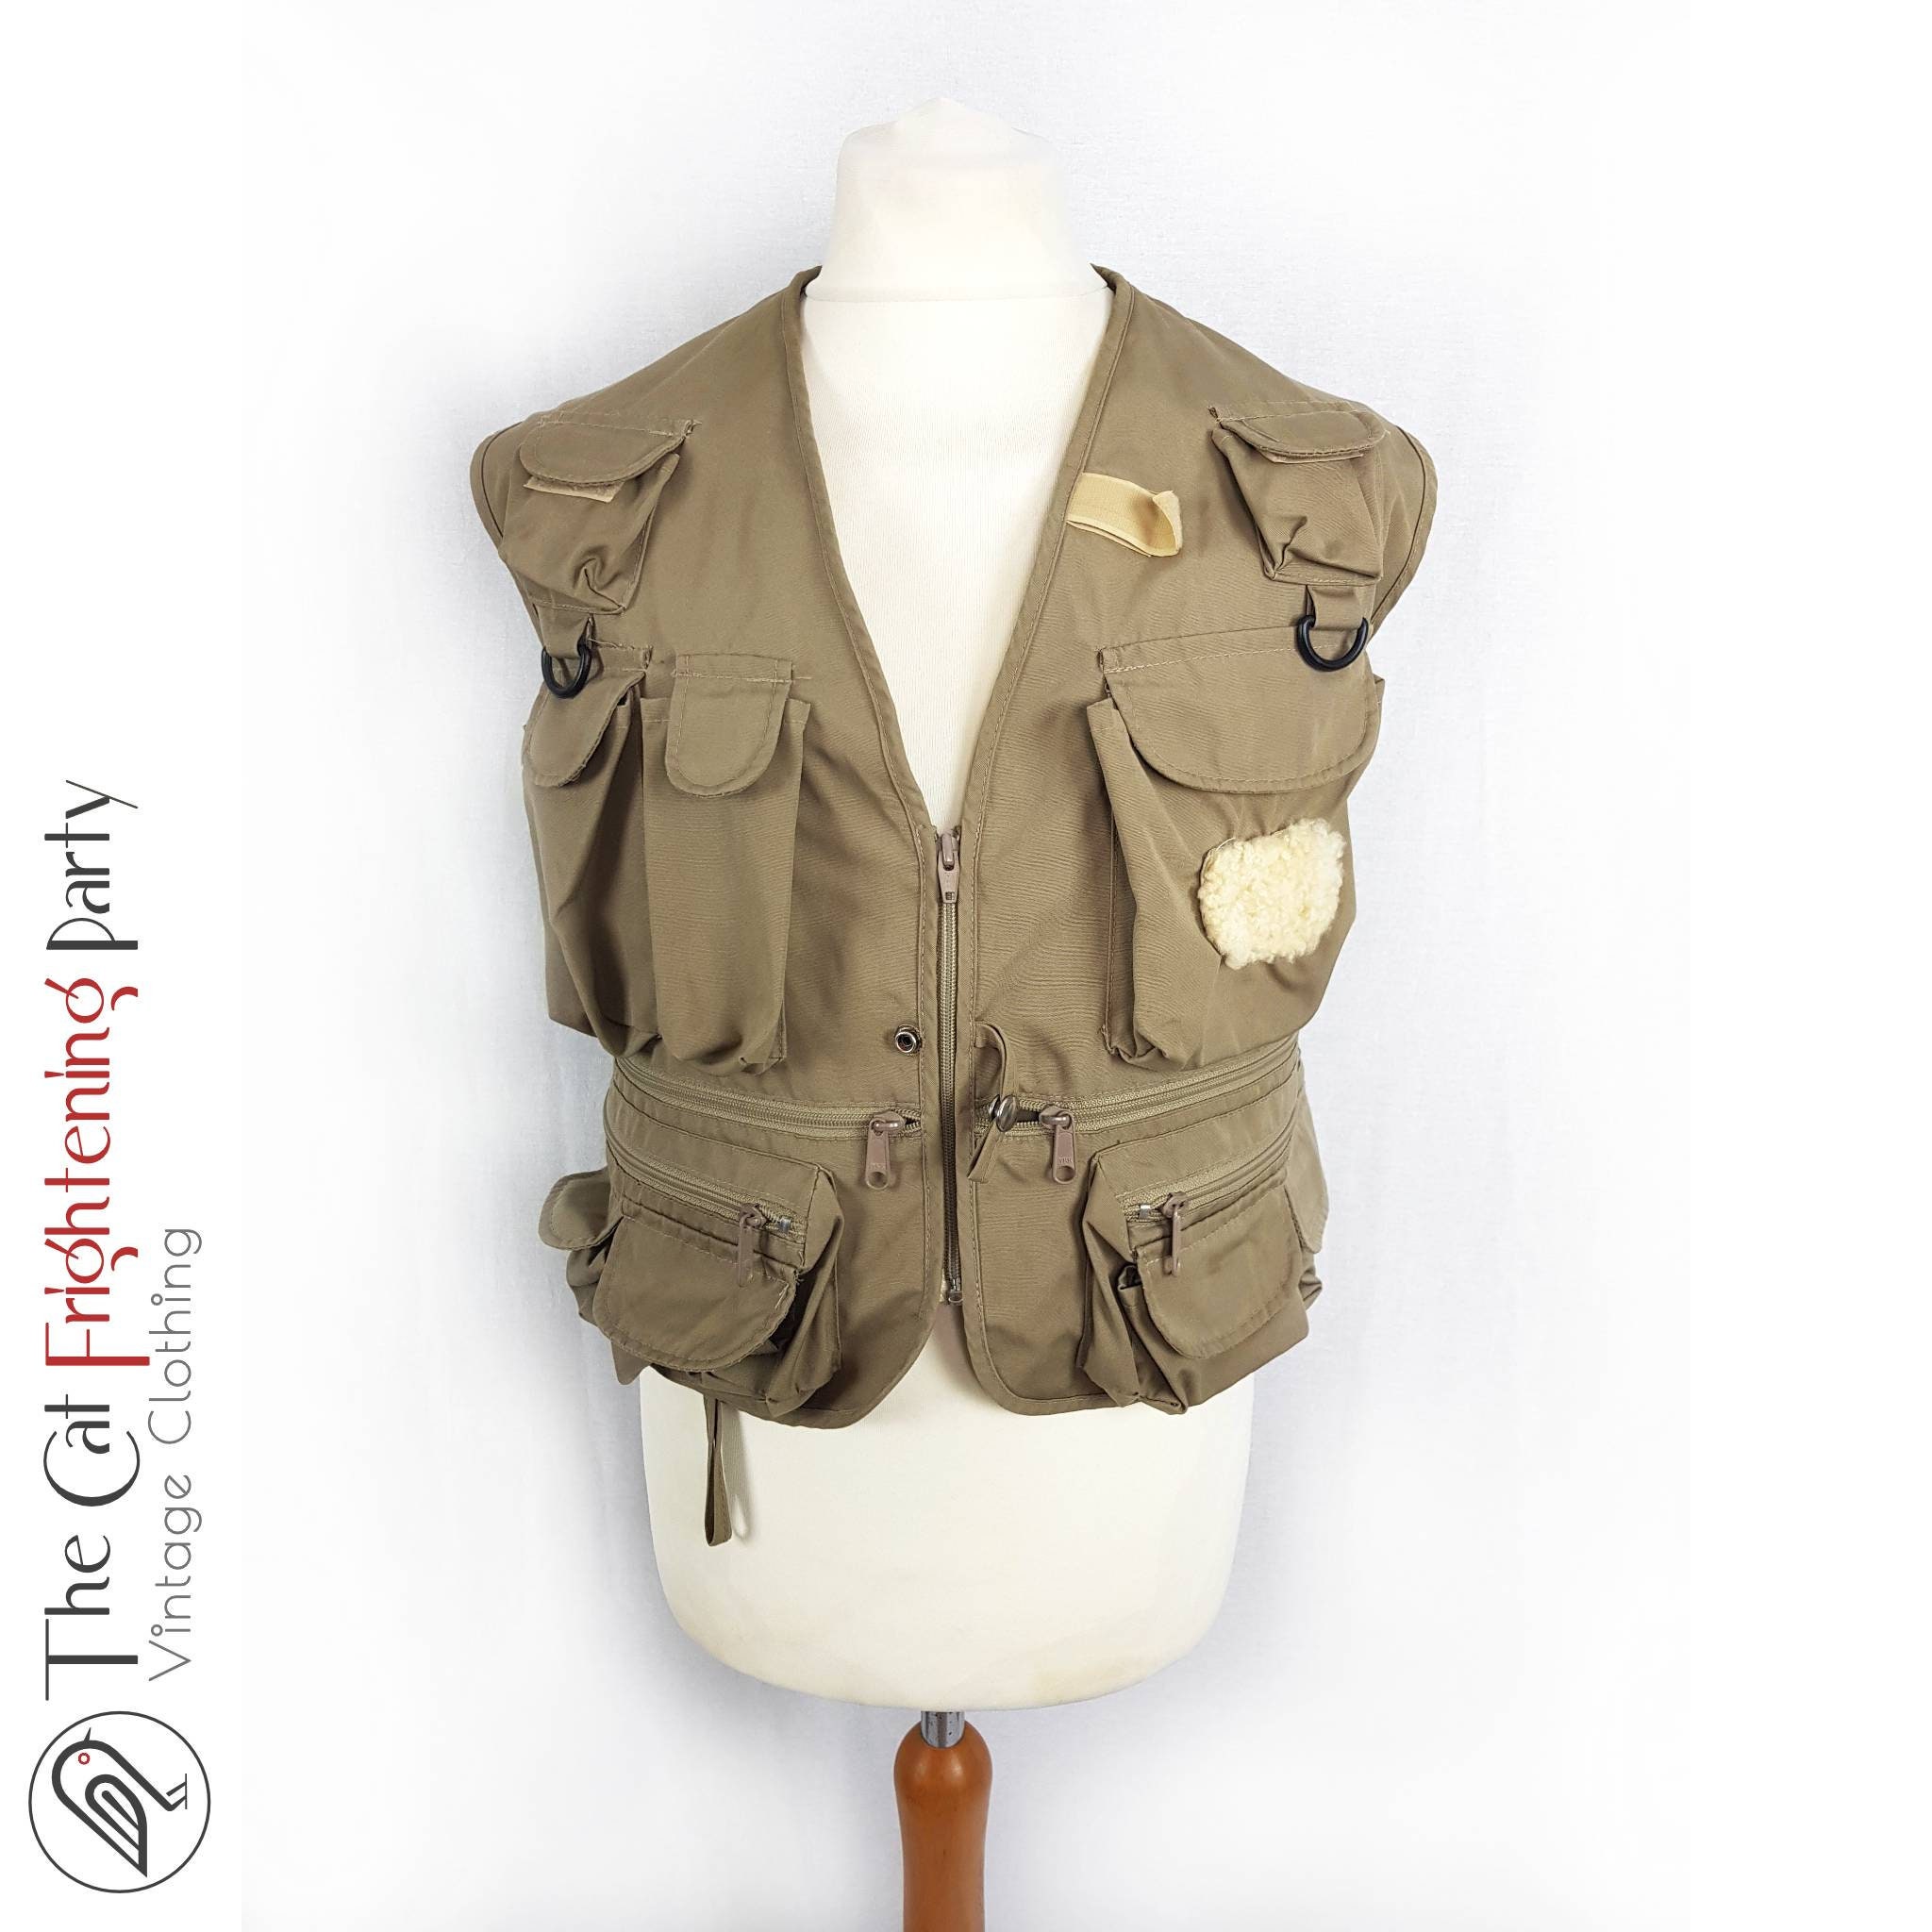 Buy Fishing Gilet, Vest, Size Xl/46-48 Chest, the Compleat Angler  Australia, Waistcoat, Fly, Outdoors, Camping, Country Pursuits, Shooting,  Online in India 